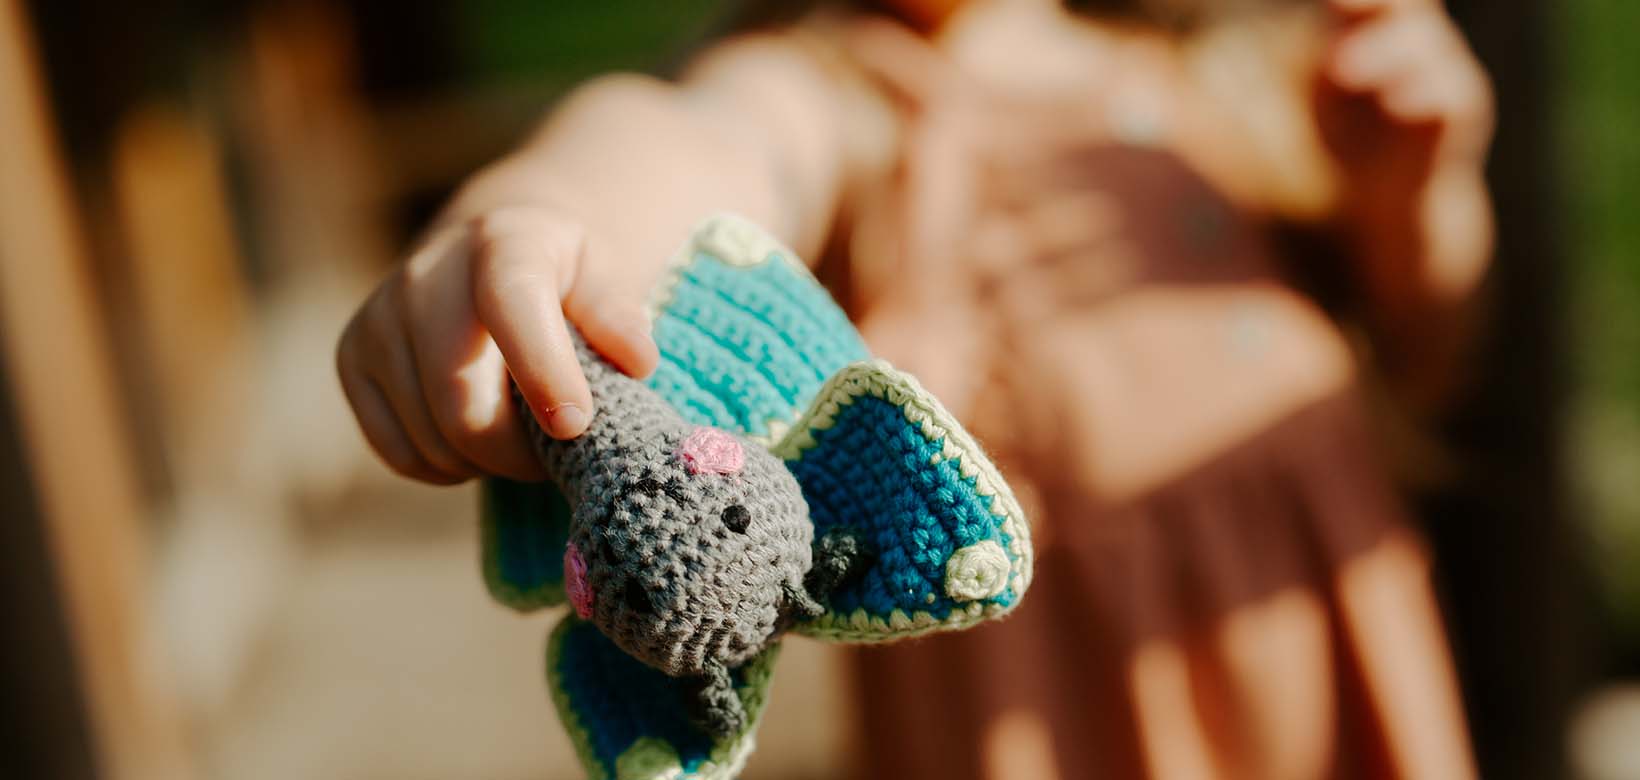 Child's hand holding Crochet Knit Baby Rattle Butterfly